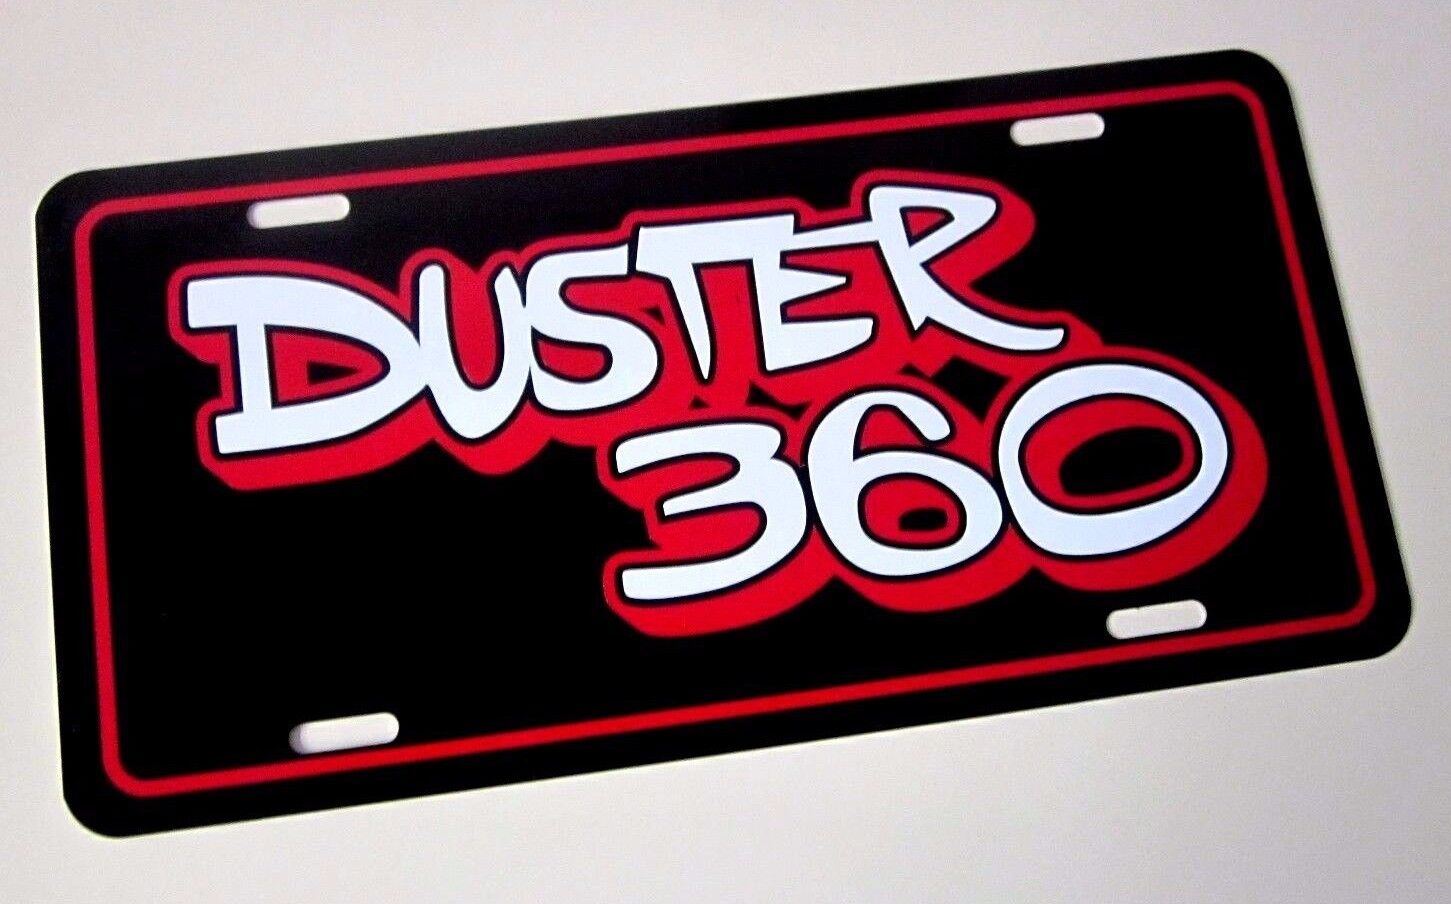 Black Plymouth DUSTER 360 license plate tag  1974 1975 1976 74 75 76 Без бренда Duster 360 - фотография #2